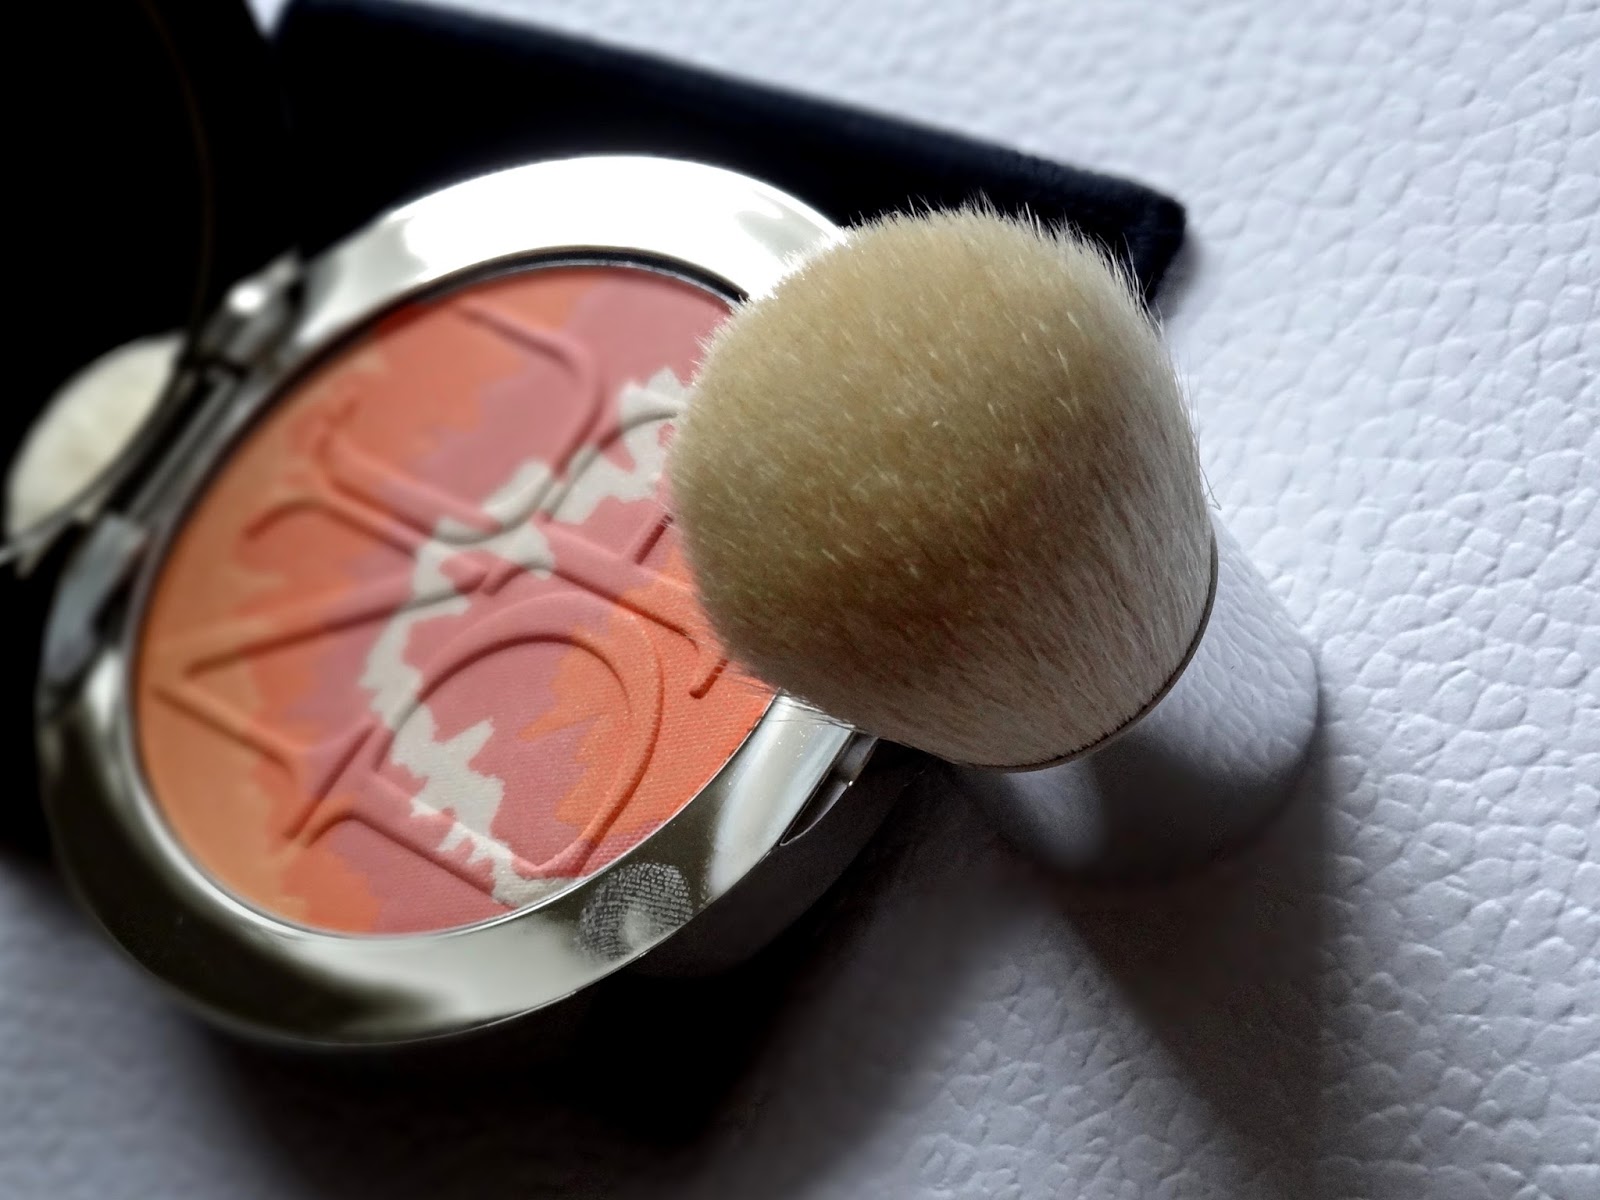 DIOR Diorskin Nude TanTie Dye Edition Blush Harmony in Coral Sunset | Dior Tie Dye Summer 2015 Collection